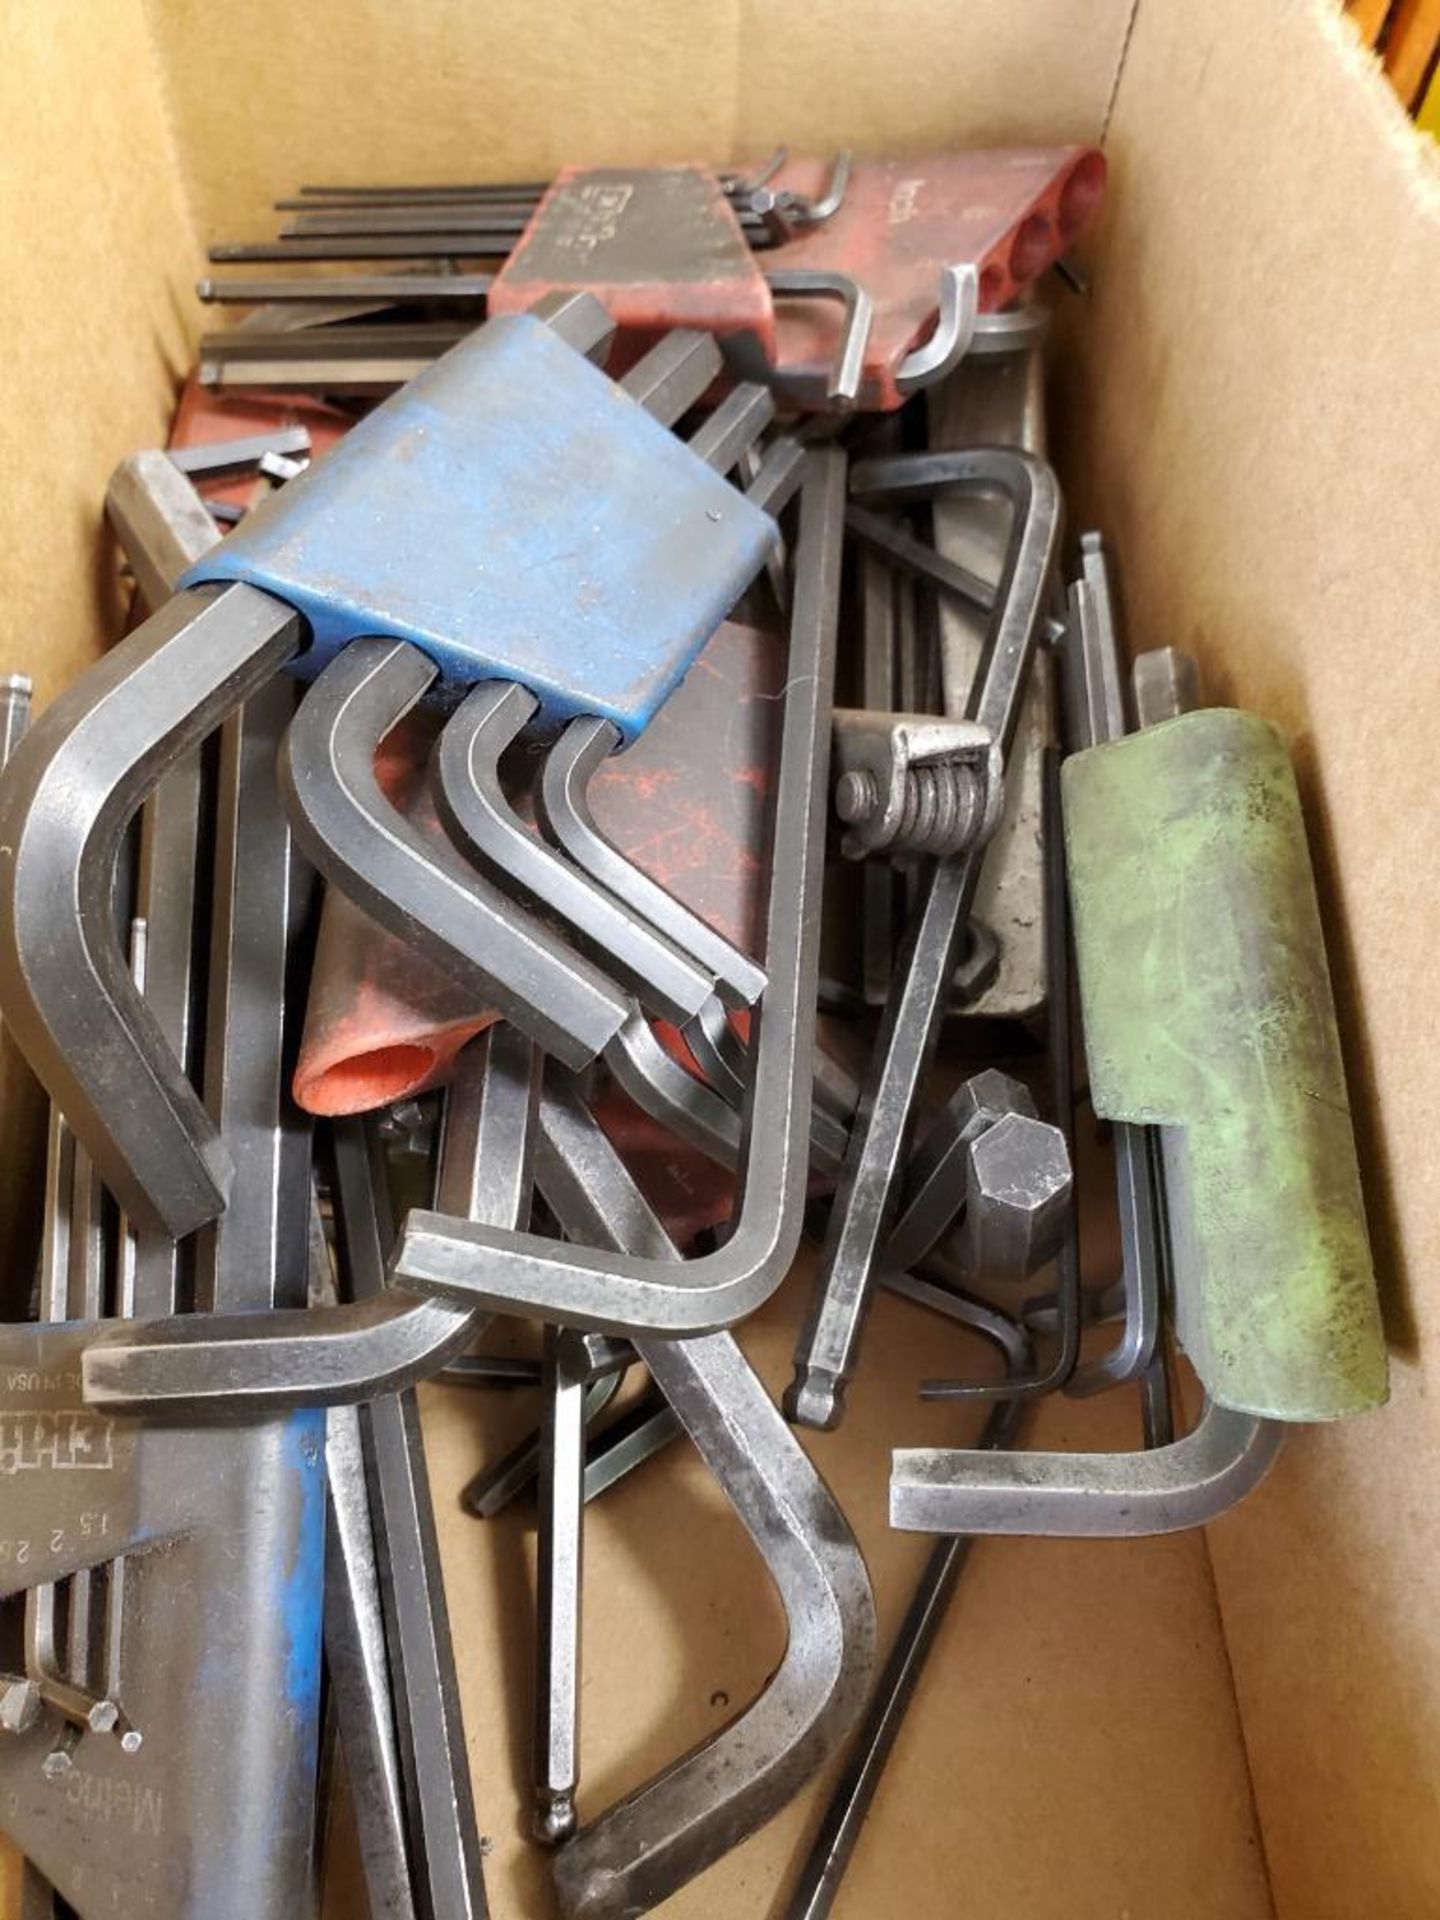 LOT OF ALLEN WRENCHES - Image 2 of 2